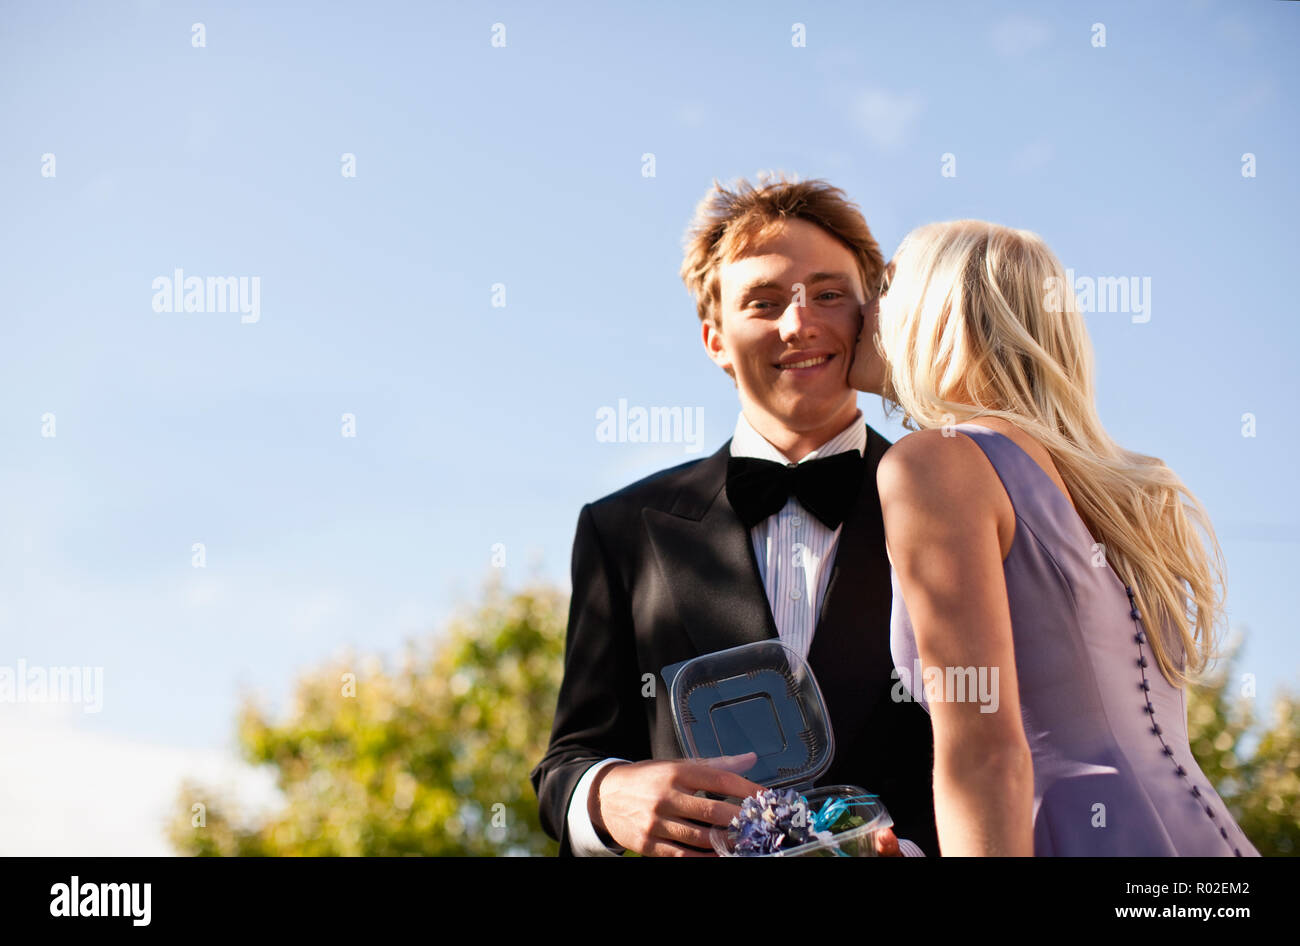 Teenage boy holding corsage in container as his prom date kisses his cheek. Stock Photo